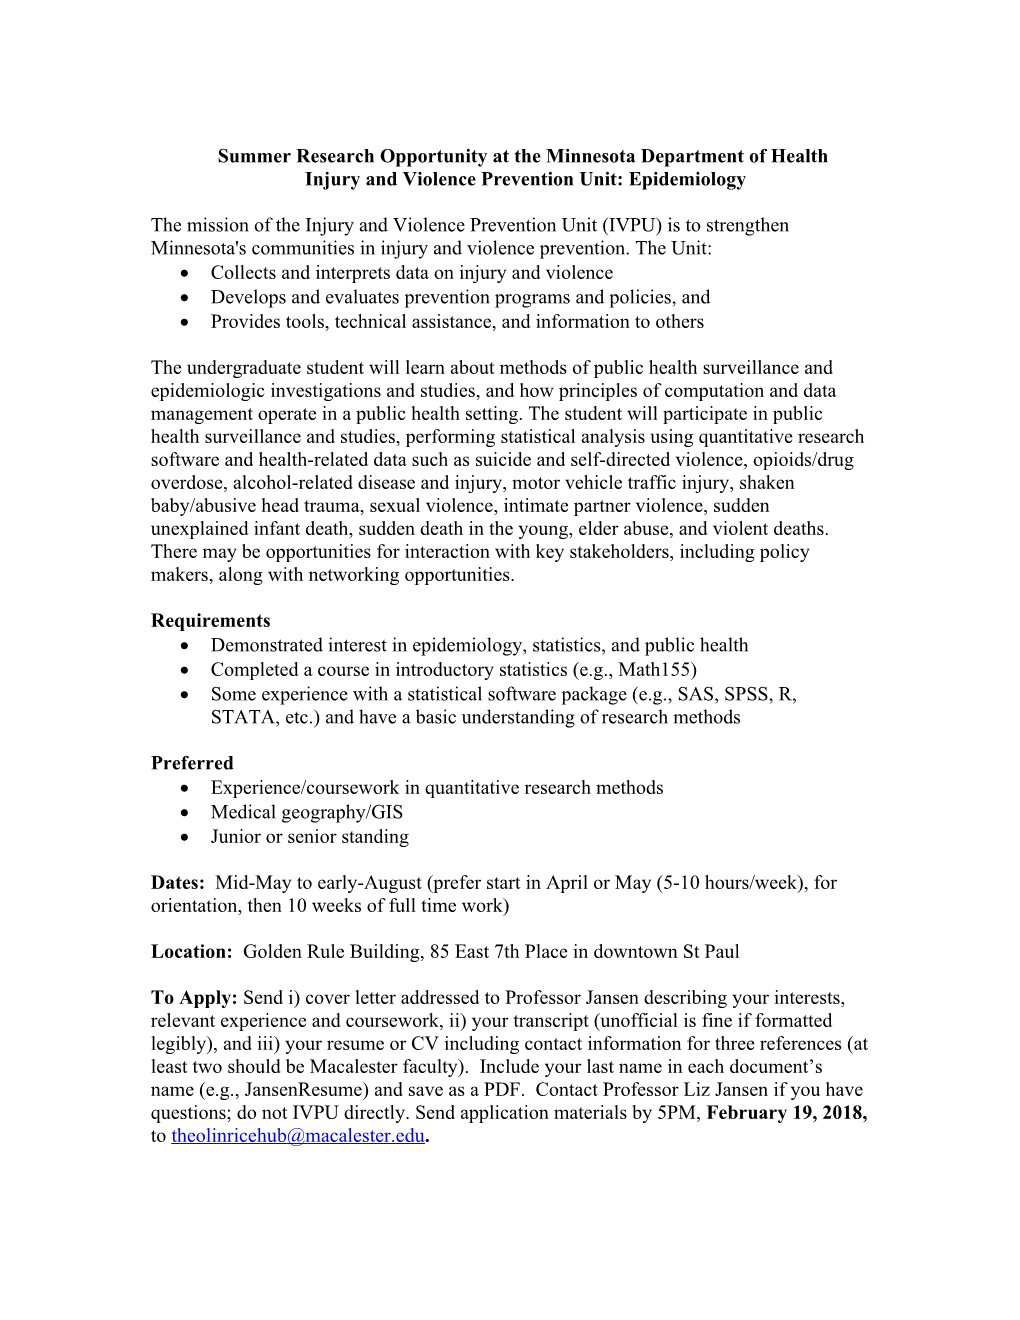 Summer Research Opportunity at the Minnesota Department of Health